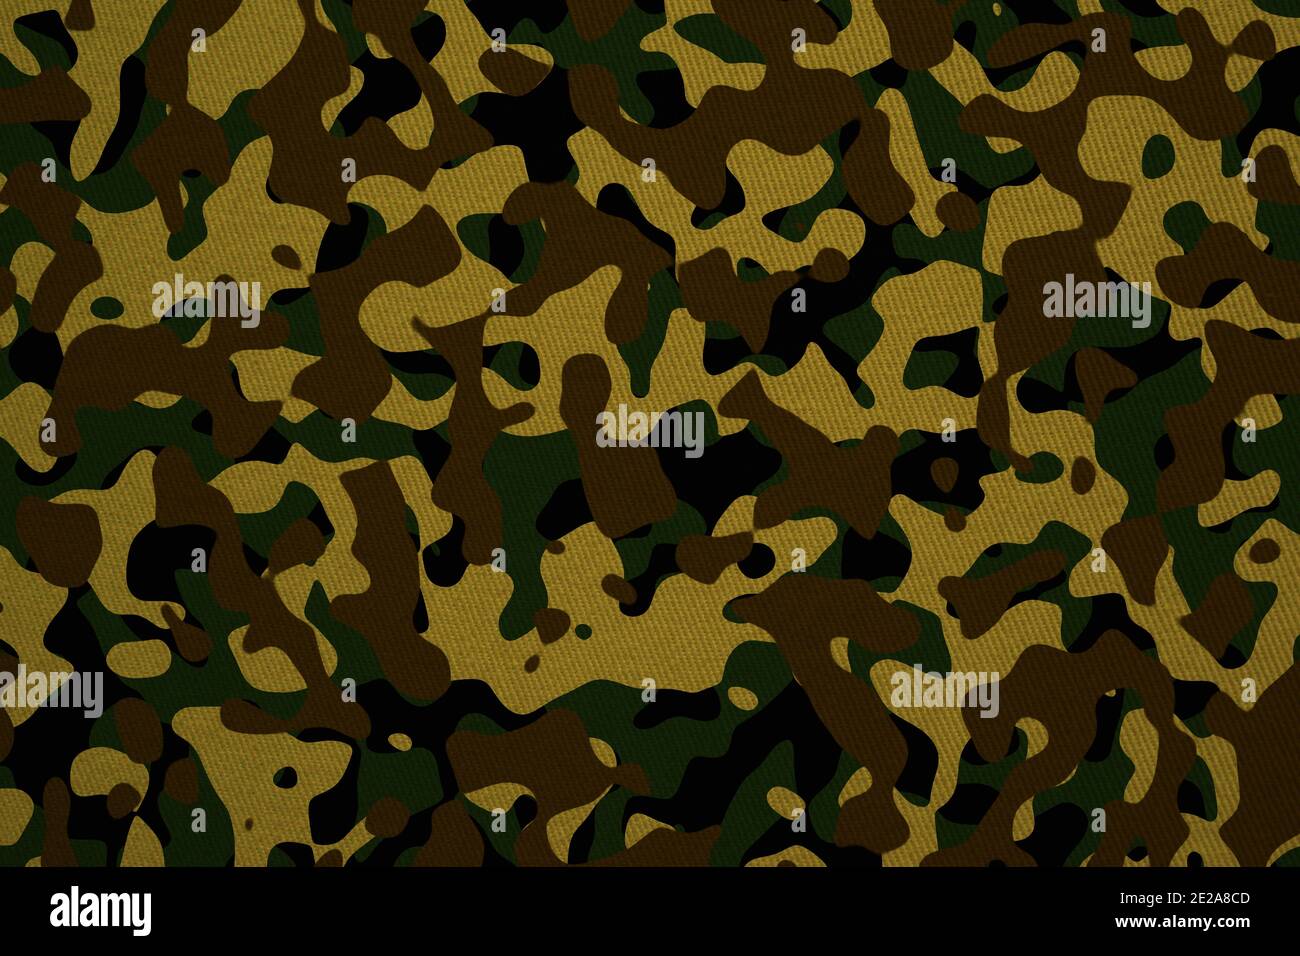 Green, brow, black military camouflage pattern texture background illustration Stock Photo